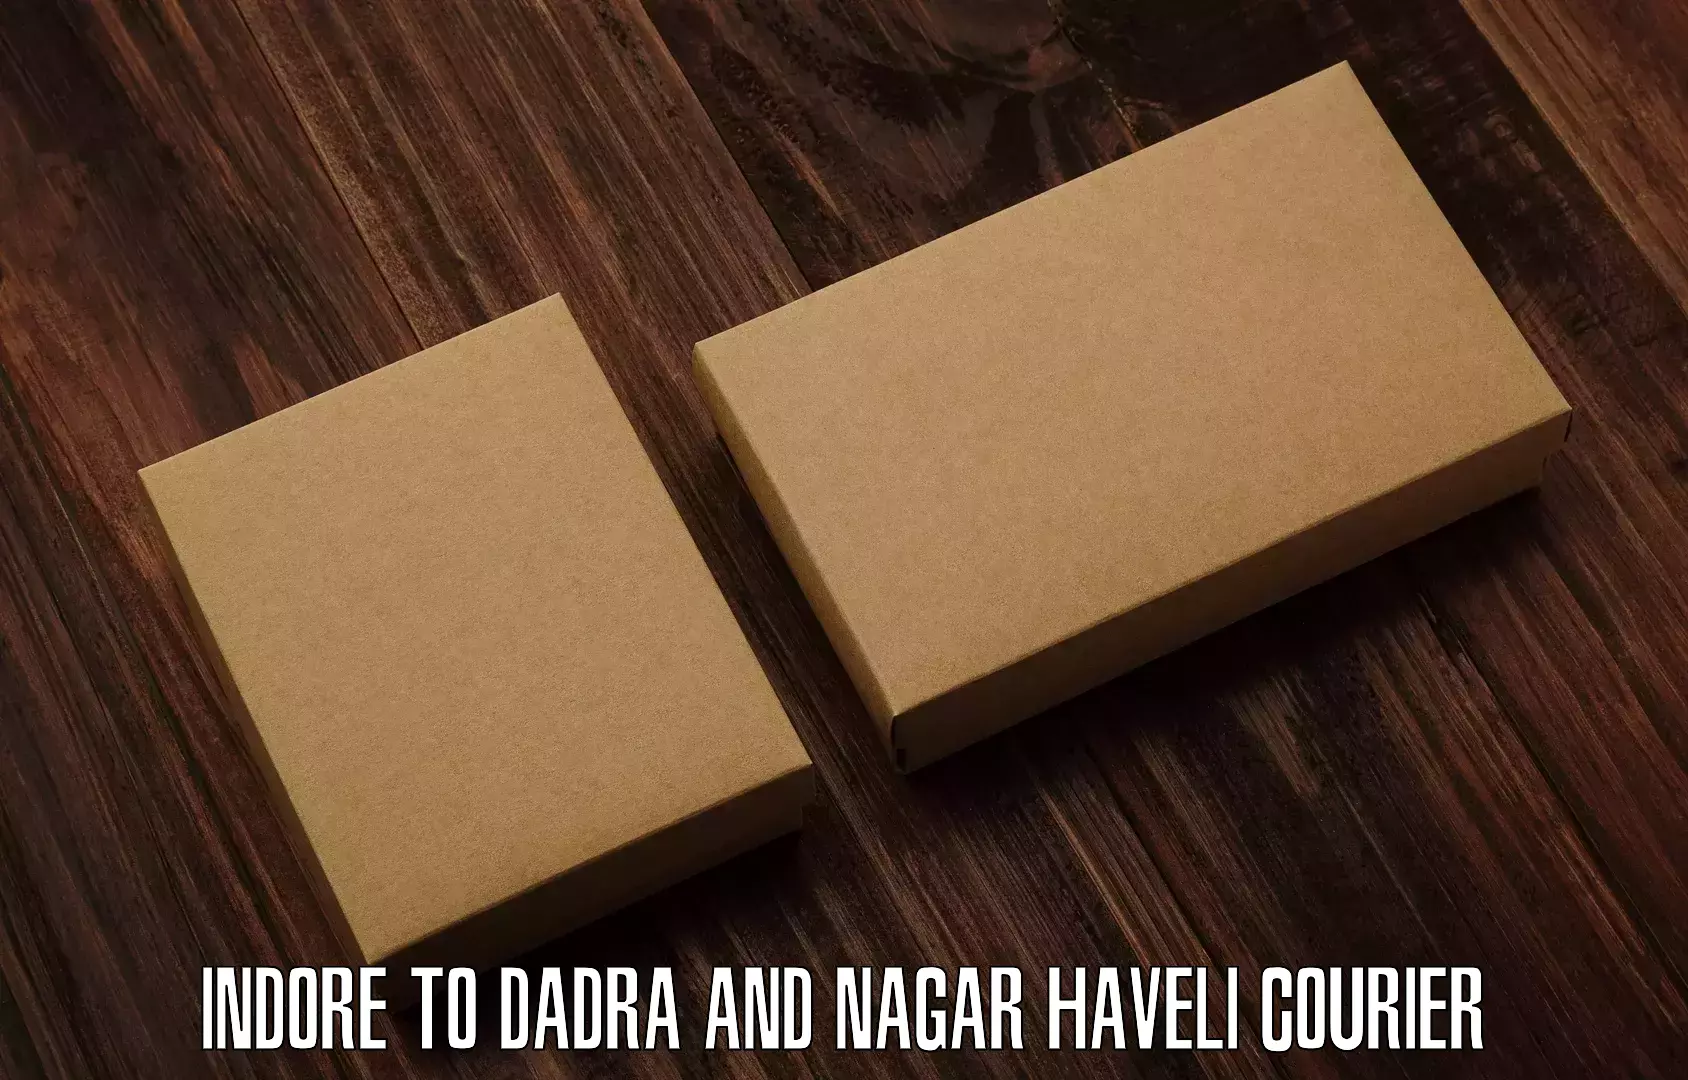 Fast delivery service in Indore to Dadra and Nagar Haveli